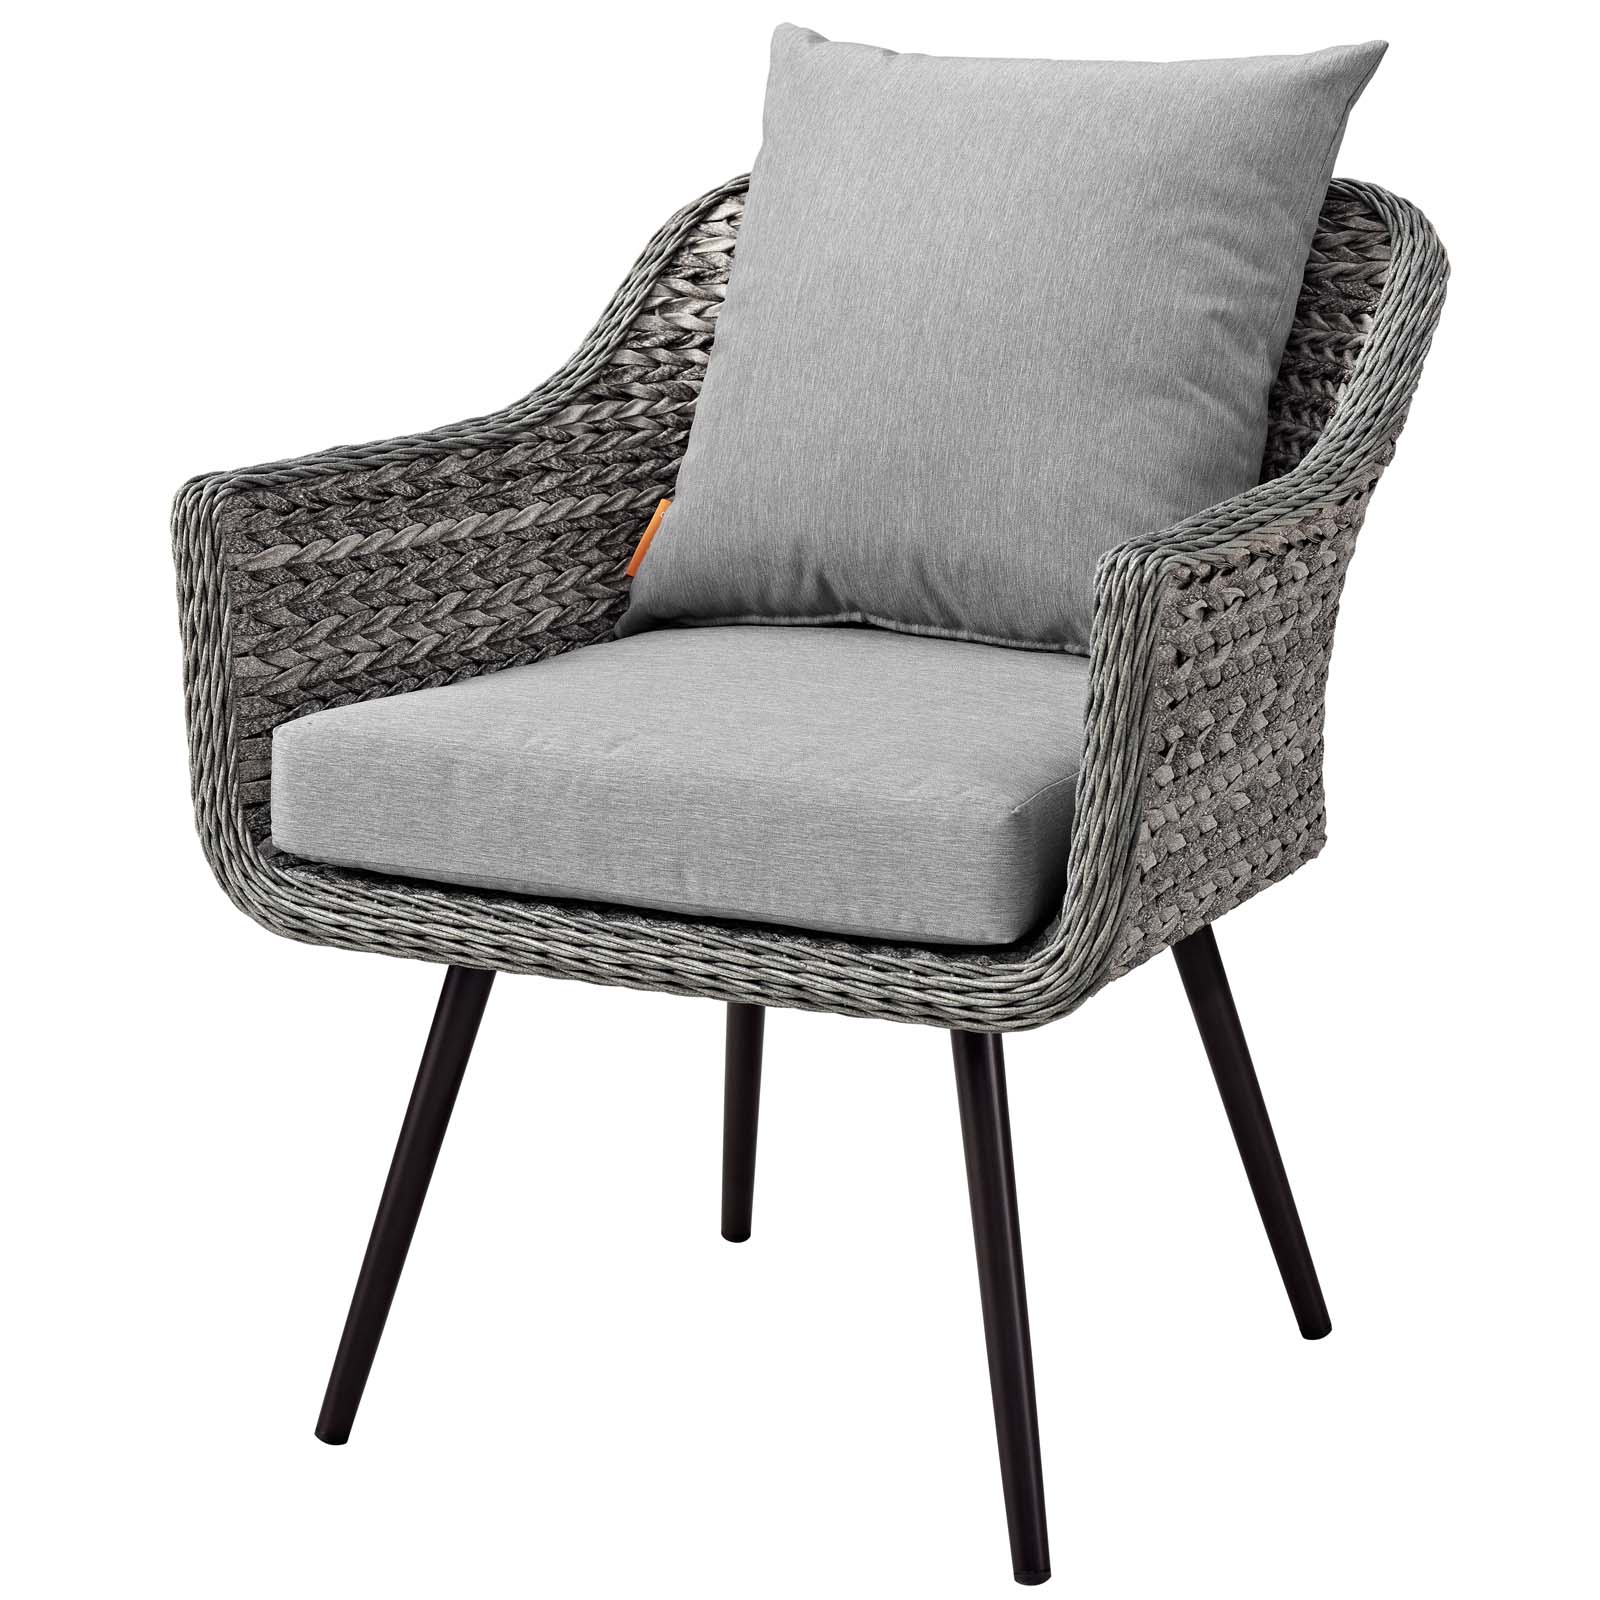 Contemporary Modern Urban Designer Outdoor Patio Balcony Garden Furniture Lounge Chair and Coffee Table Set, Aluminum Fabric Wicker Rattan, Grey Gray - image 3 of 8